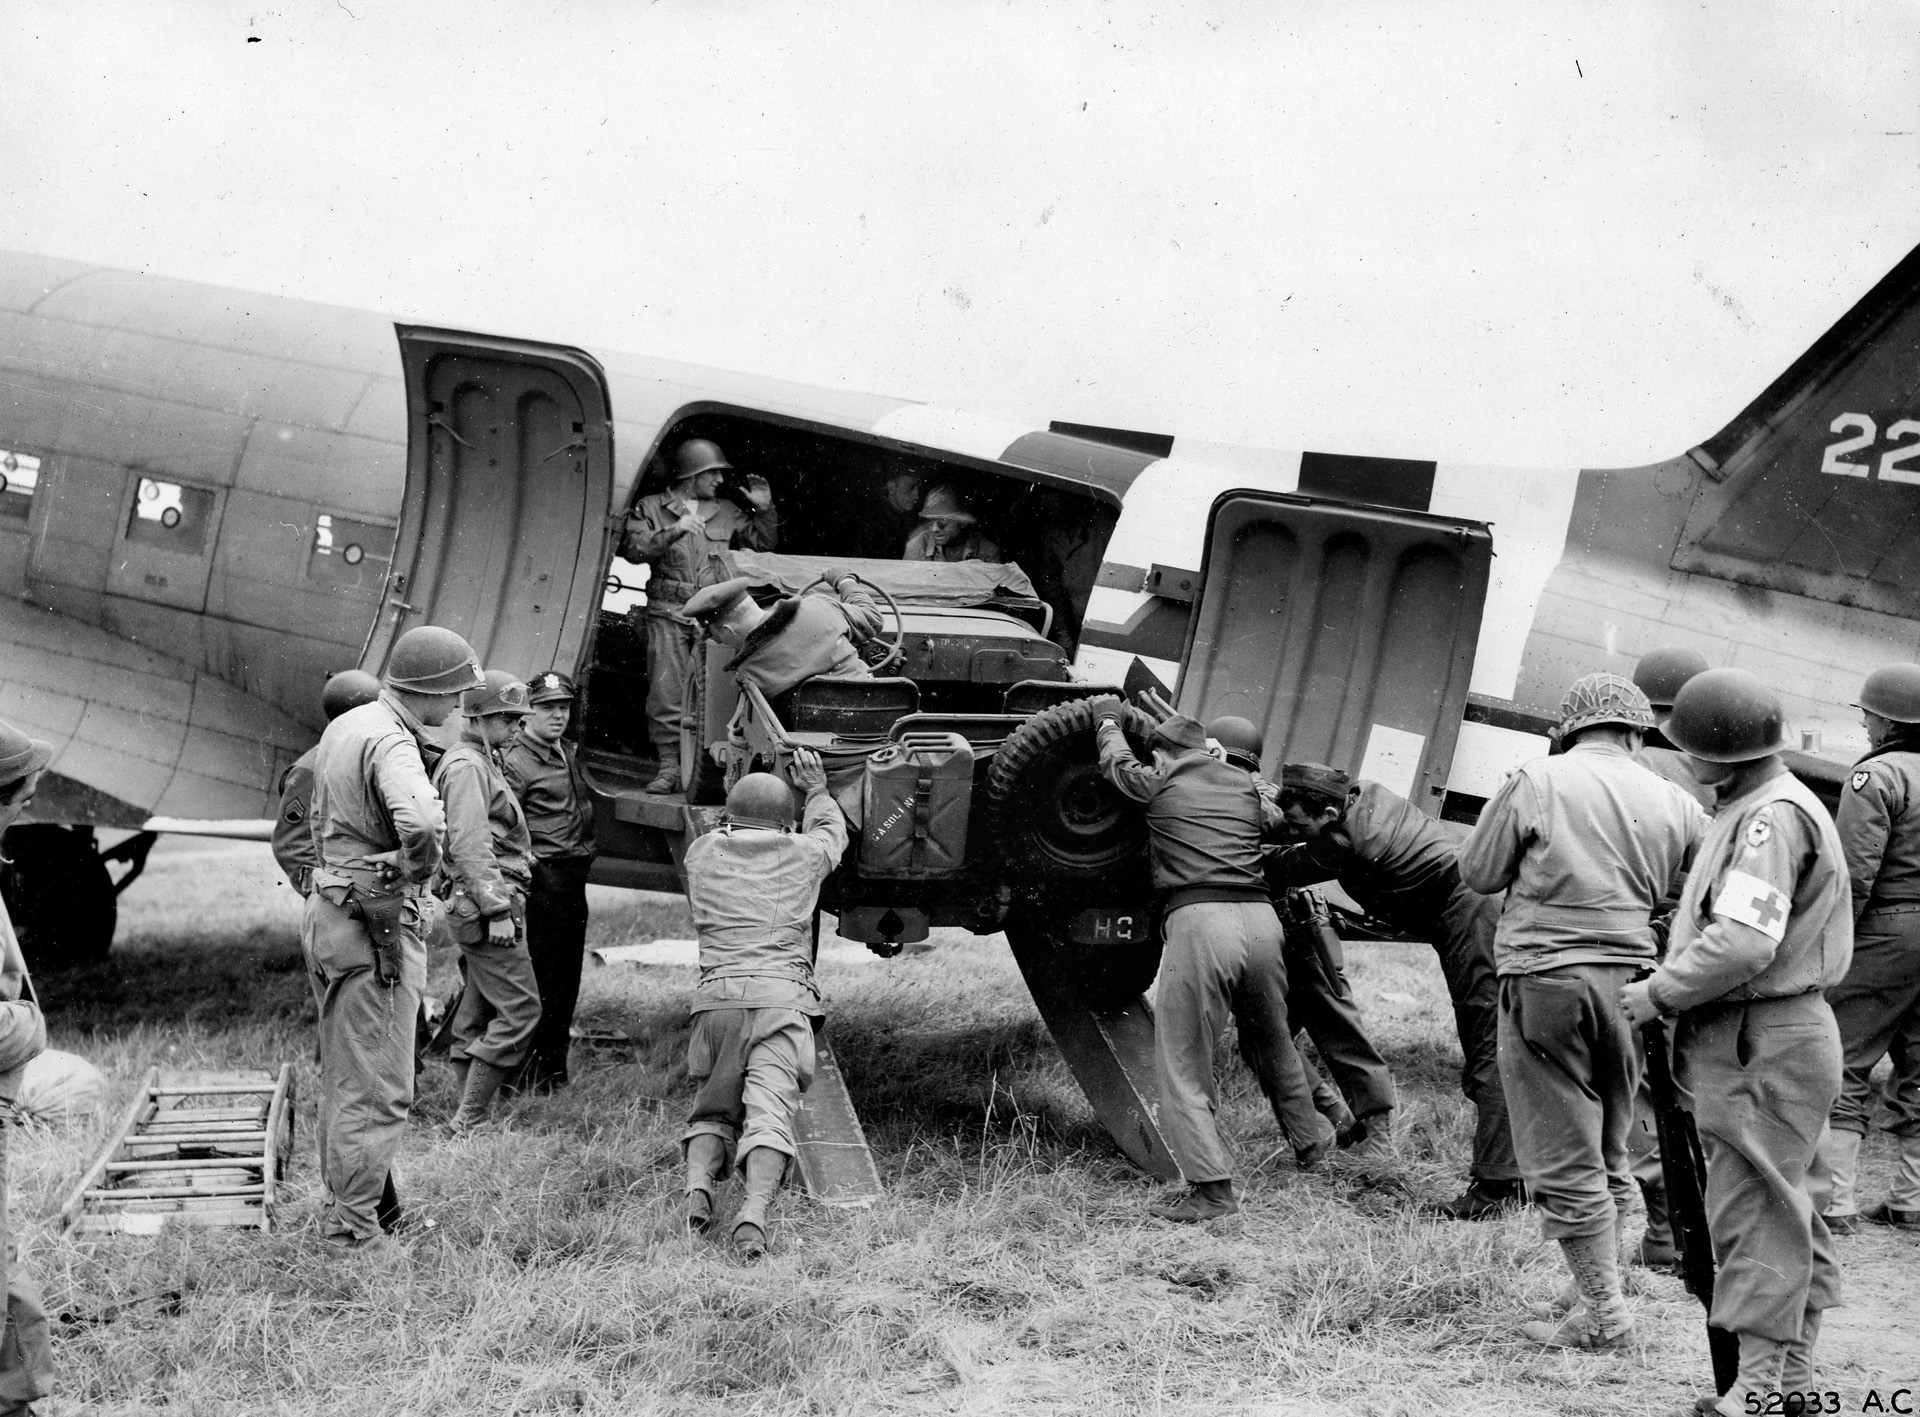 Members of Ninth Carrier Command unload a Jeep from a C-47 on one of the emergency landing strips in France. Without the Troop Carrier Commands, the American war effort in the European Theater would have ground to a halt.